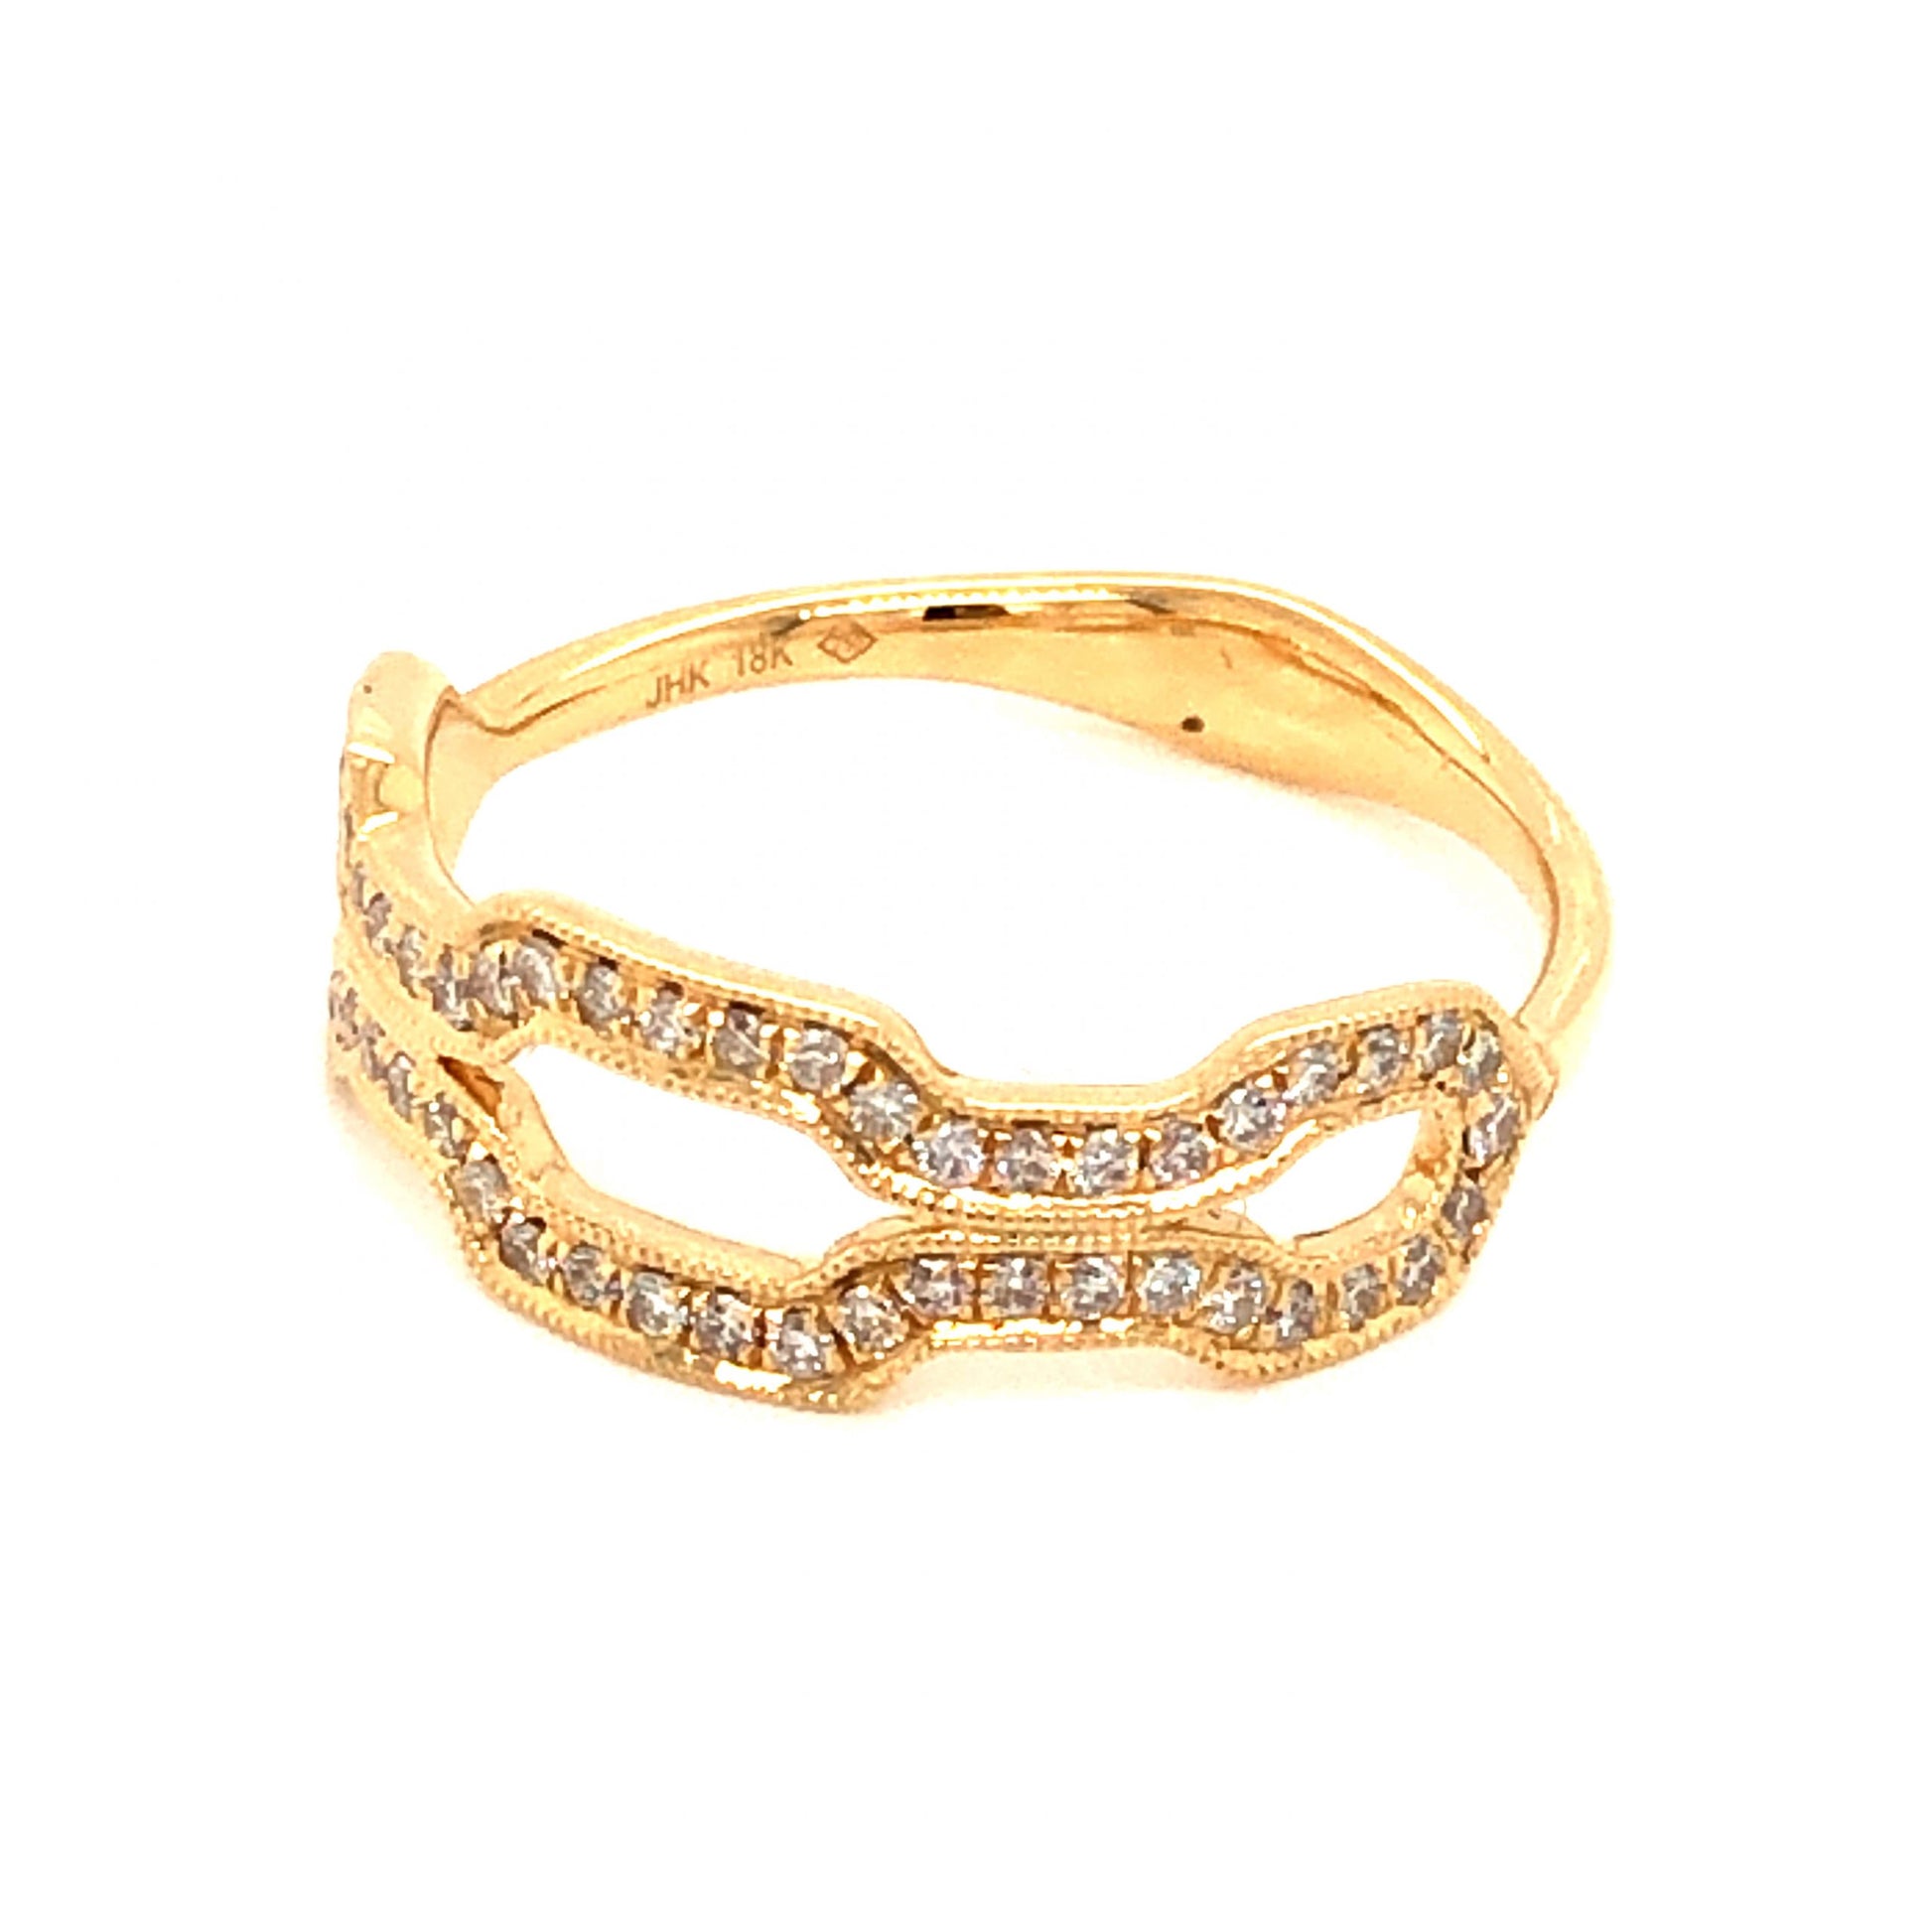 .27 Diamond Geometric Stacking Band in 18k Yellow GoldComposition: PlatinumRing Size: 6.5Total Diamond Weight: .27 ctTotal Gram Weight: 2.8 gInscription: JHK, 18K, 750 